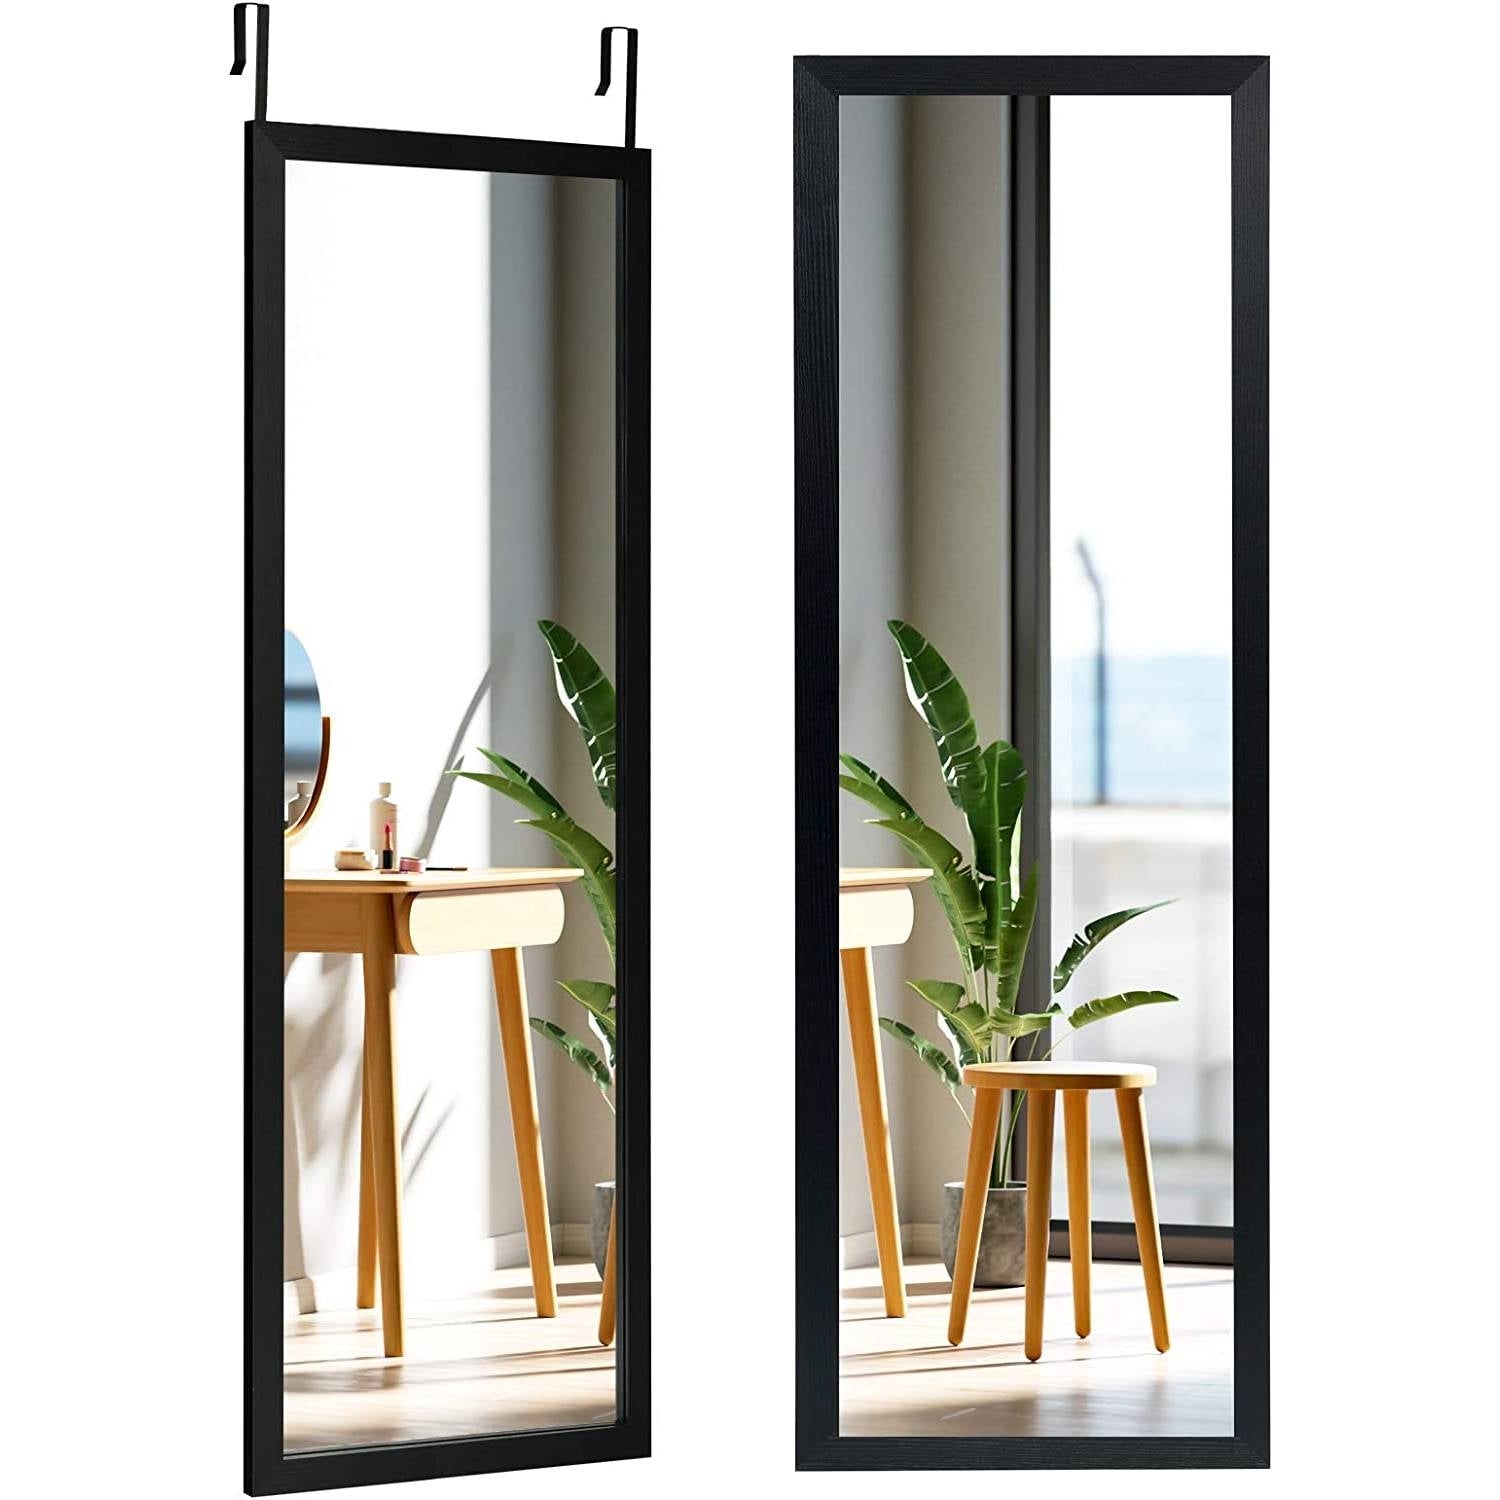 Black Full Length Bedroom Mirror with Over the Door or Wall Mounted Design